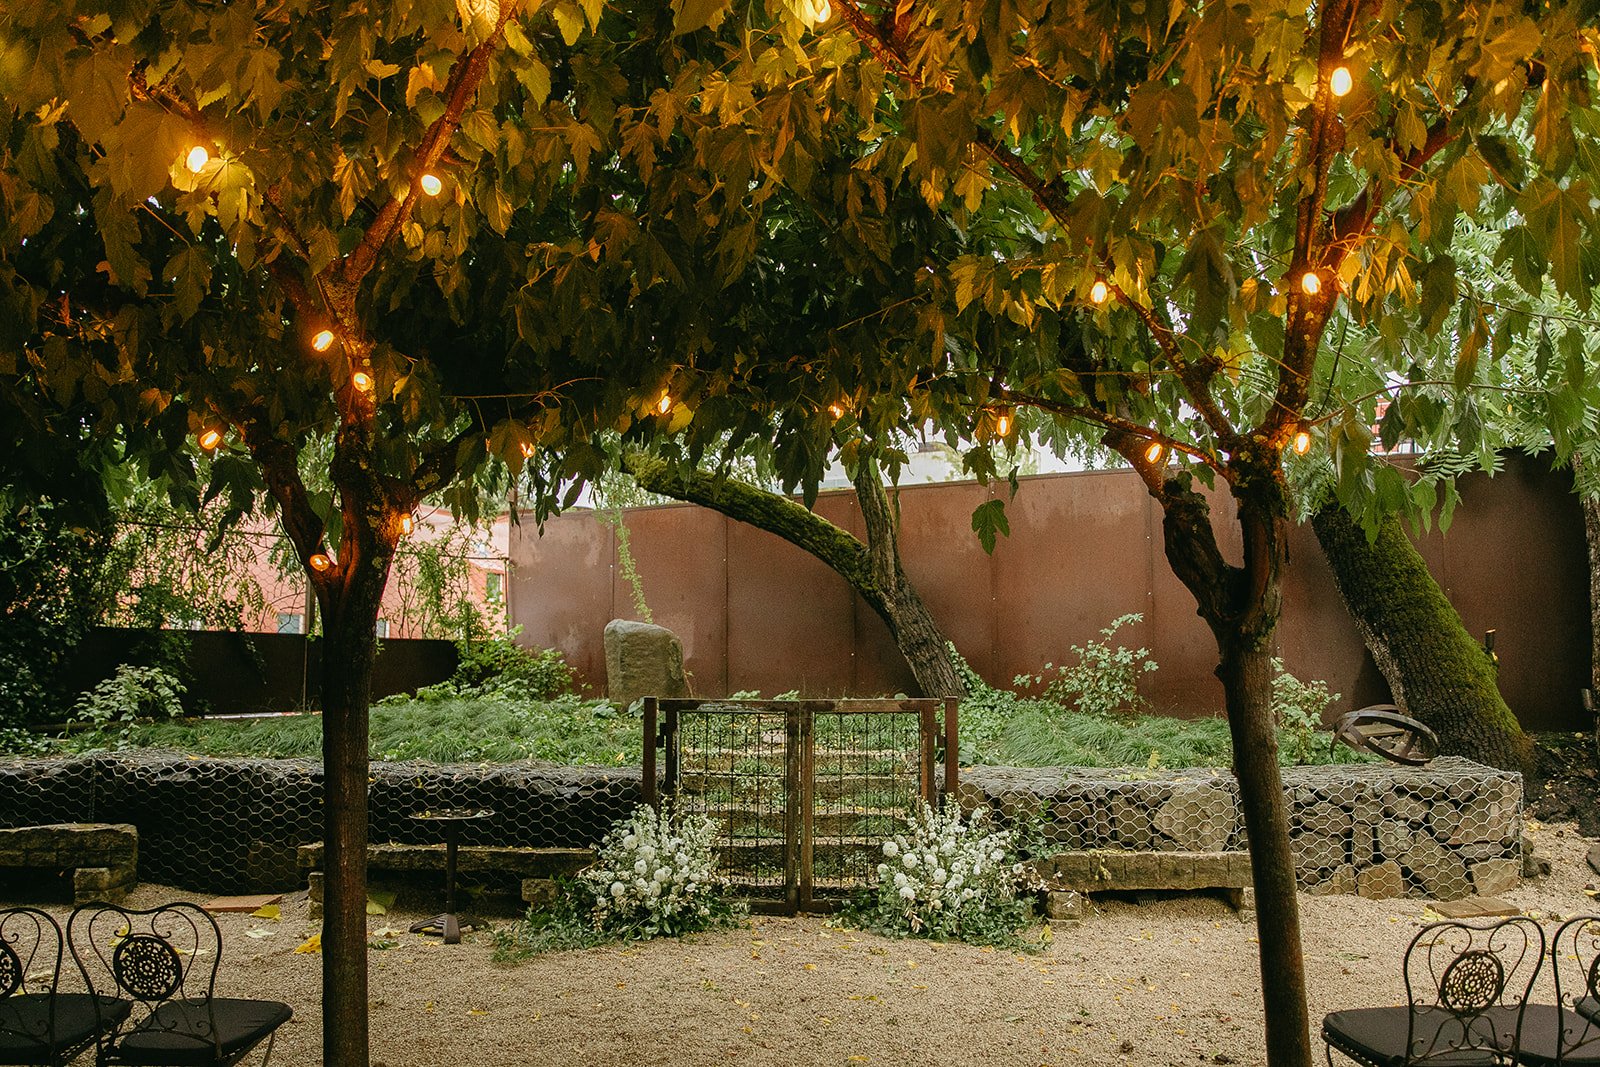 Rustic fall wedding with an outdoor wedding ceremony